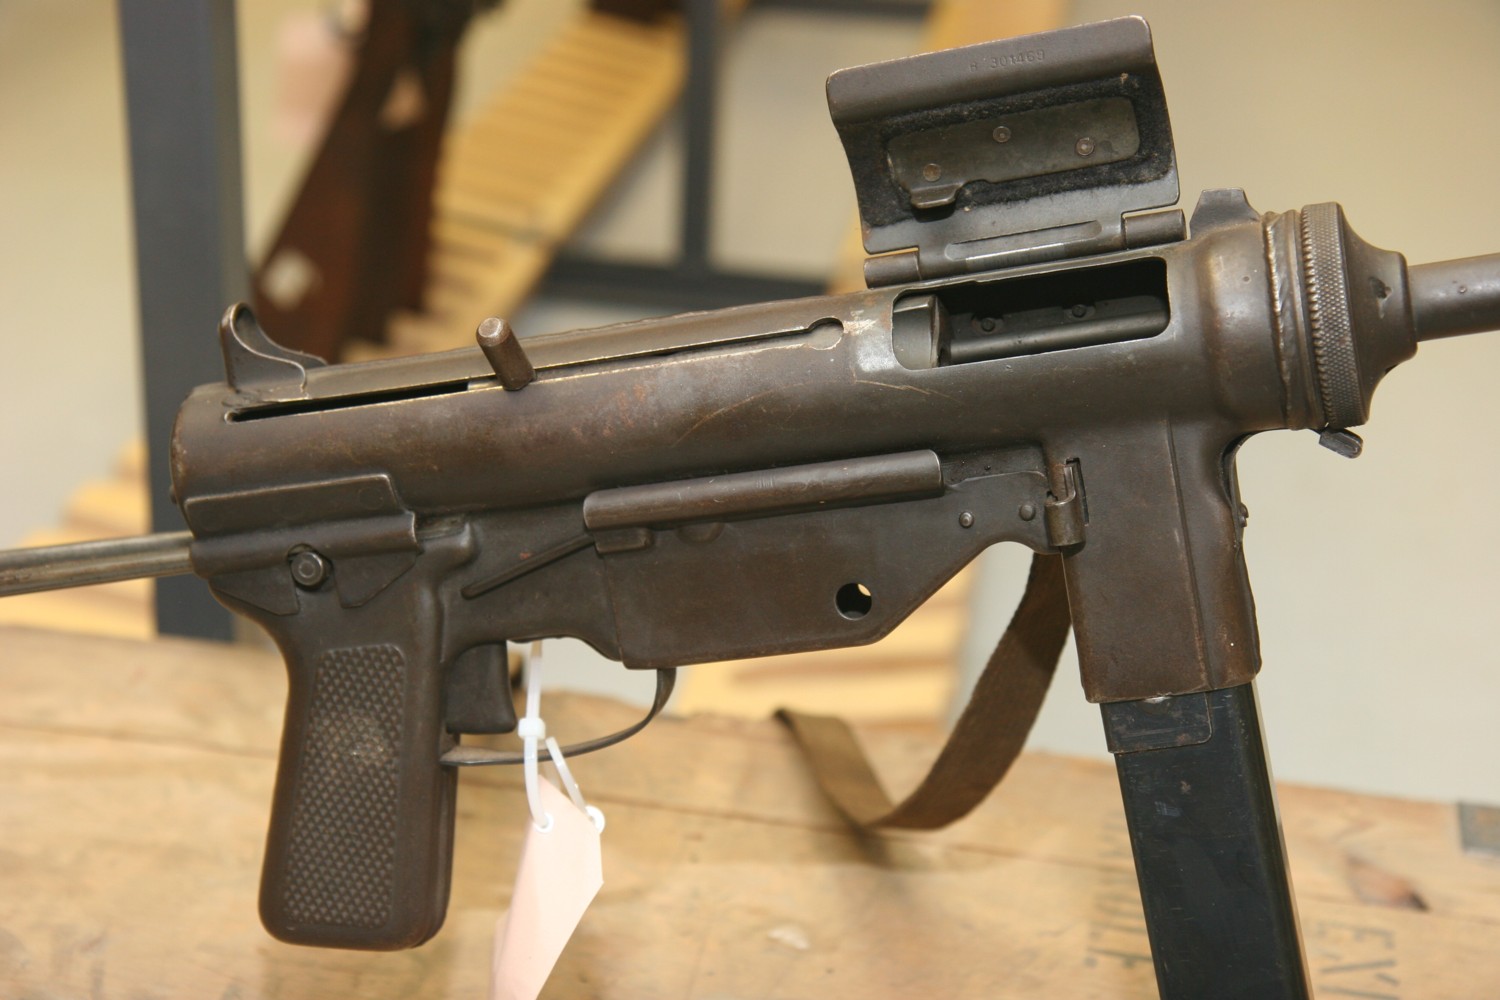 Field_Modified_Guide_M3_Submachine_gun_in_the_collection_of_Mus%C3%A9e_National_d%27Histoire_Militaire_%28The_National_Museum_of_Military_History%29_in_Diekirch%2C_Luxembourg.jpg